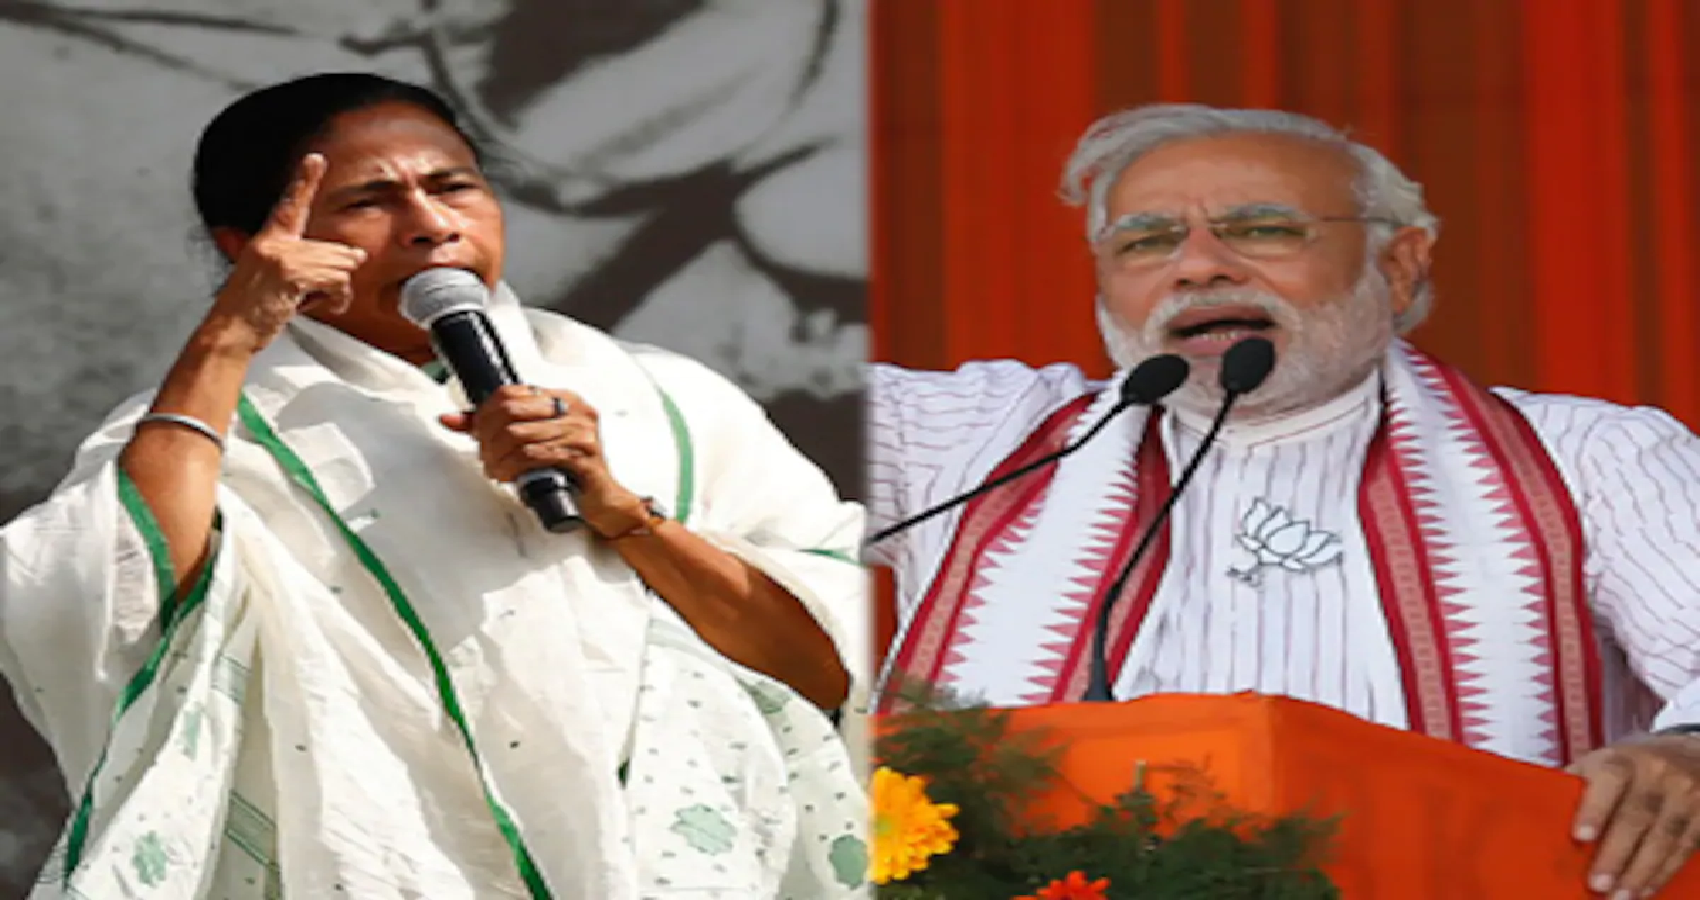 Modi-Led BJP Trounced In 3 Key Indian State Polls. Mamata Emerges As Contender On National Political Stage